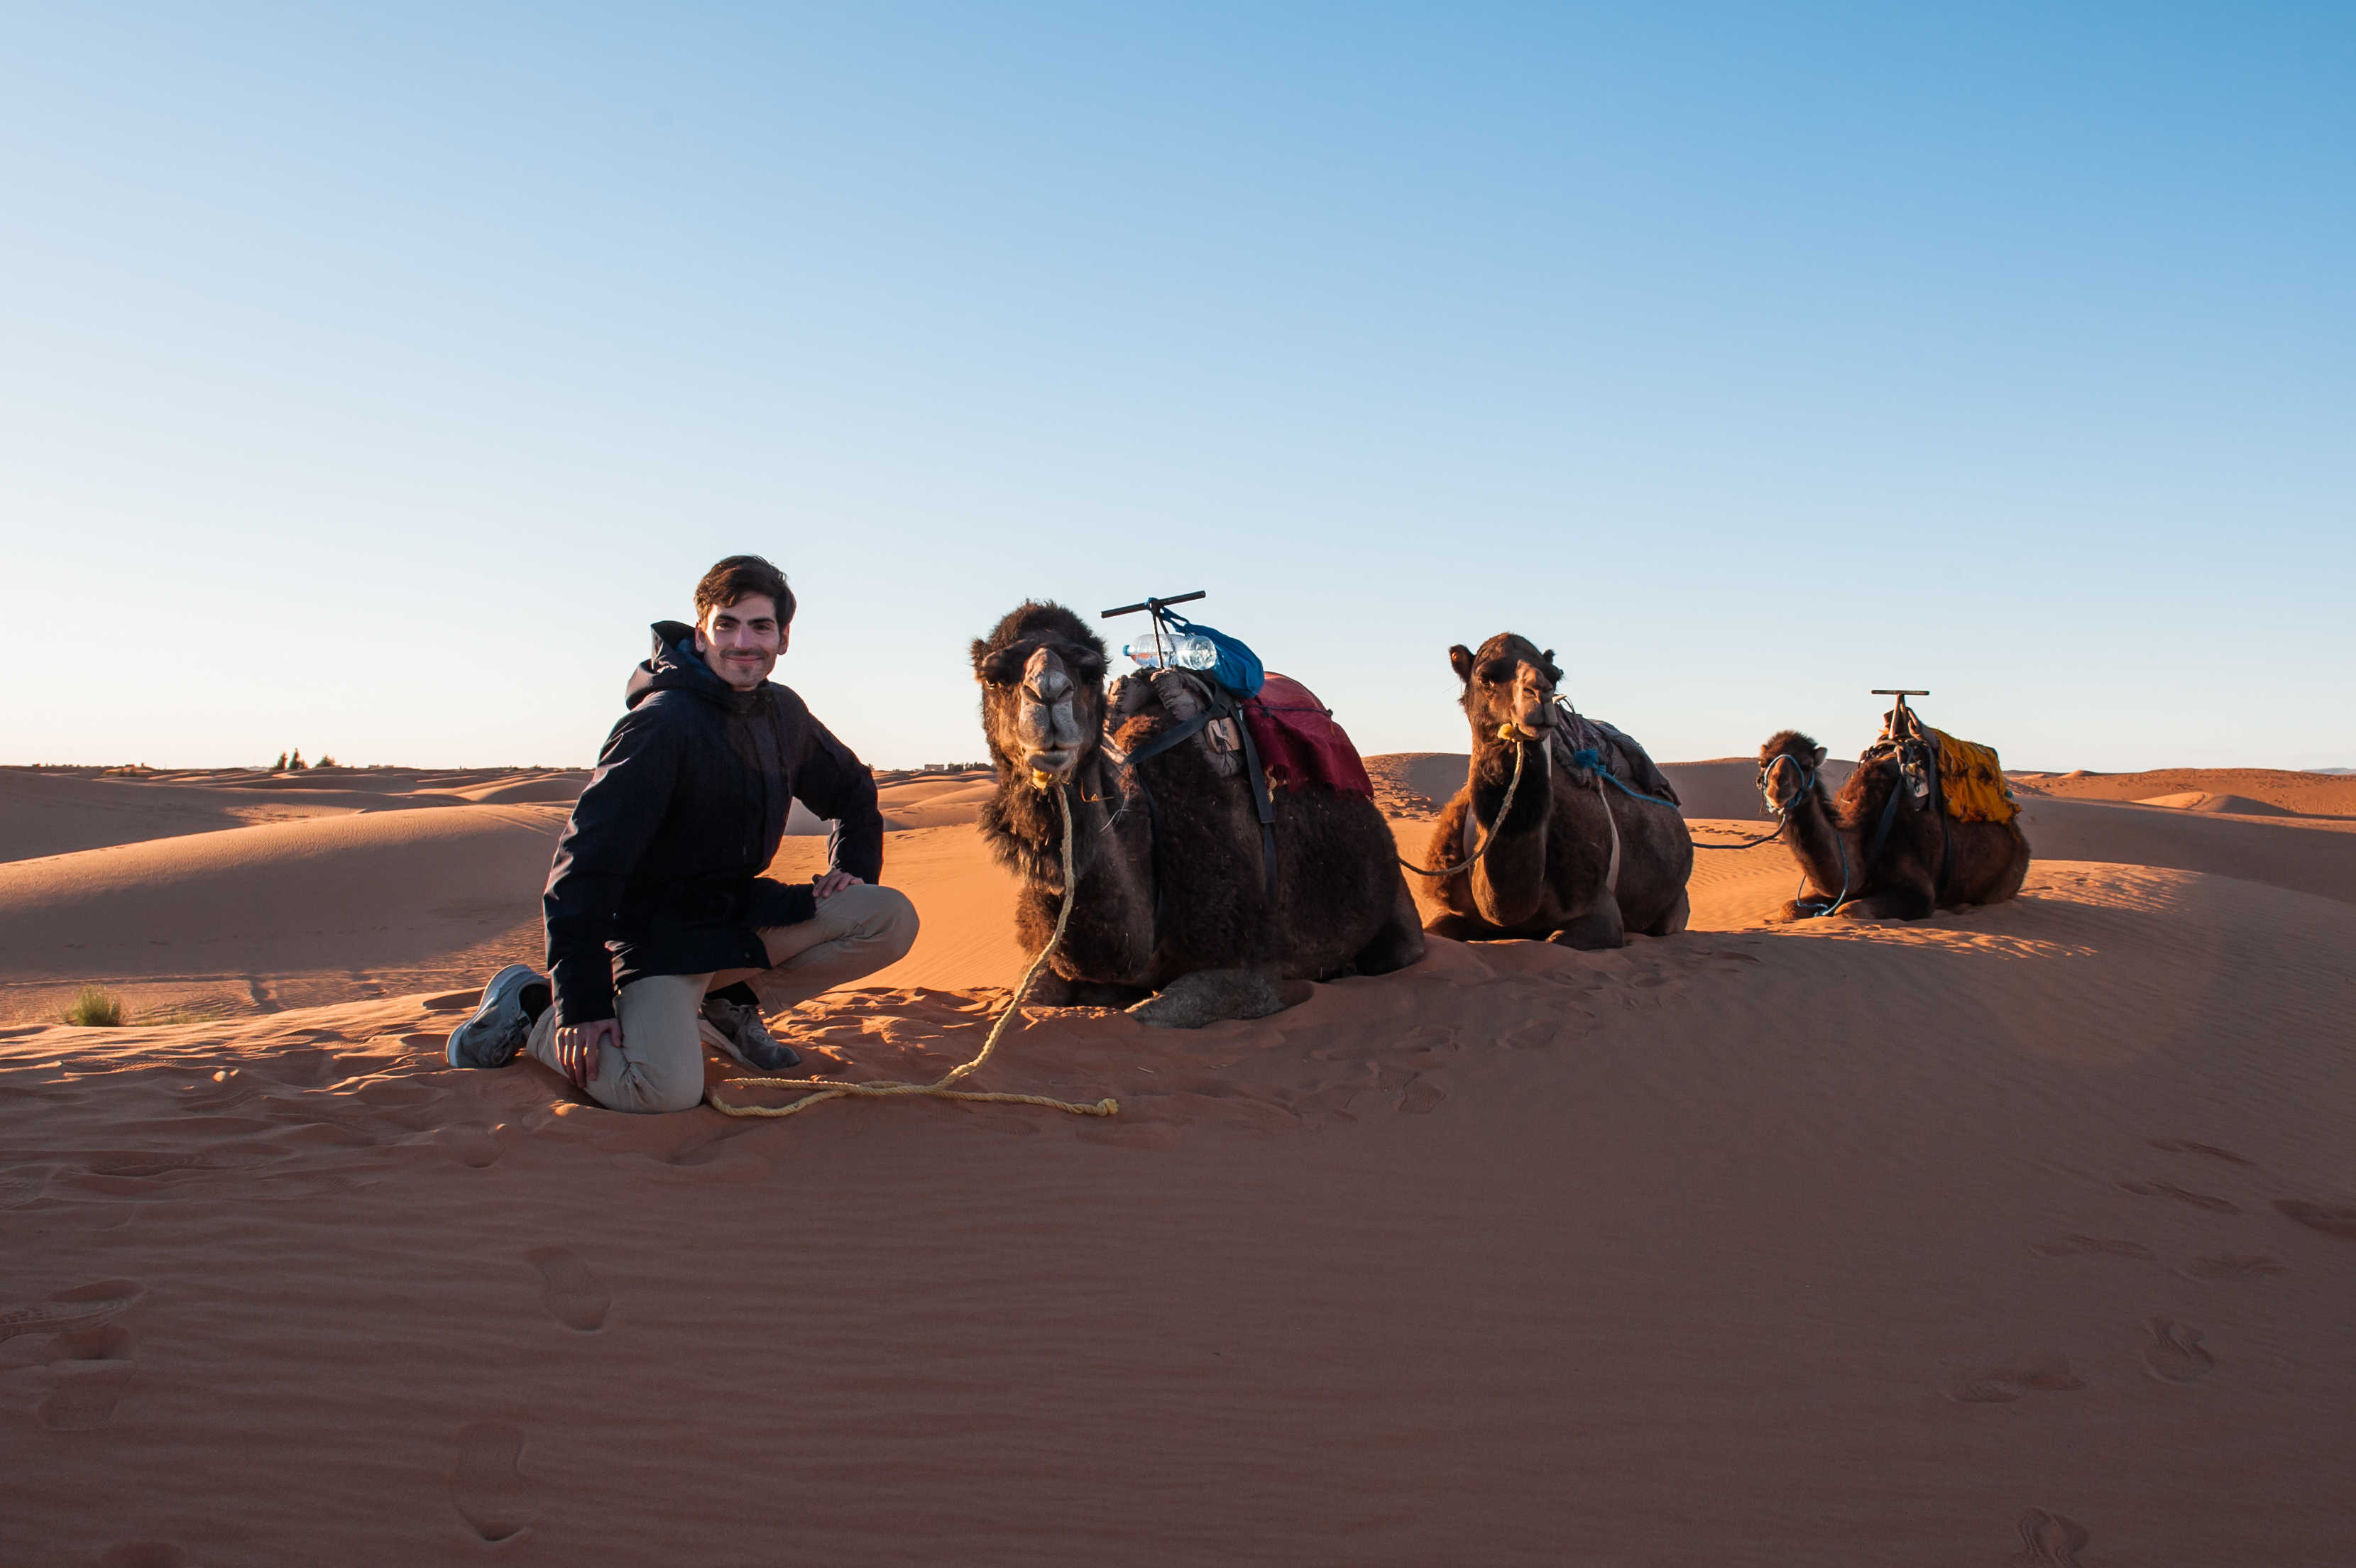 Camels in the Merzouga Desert